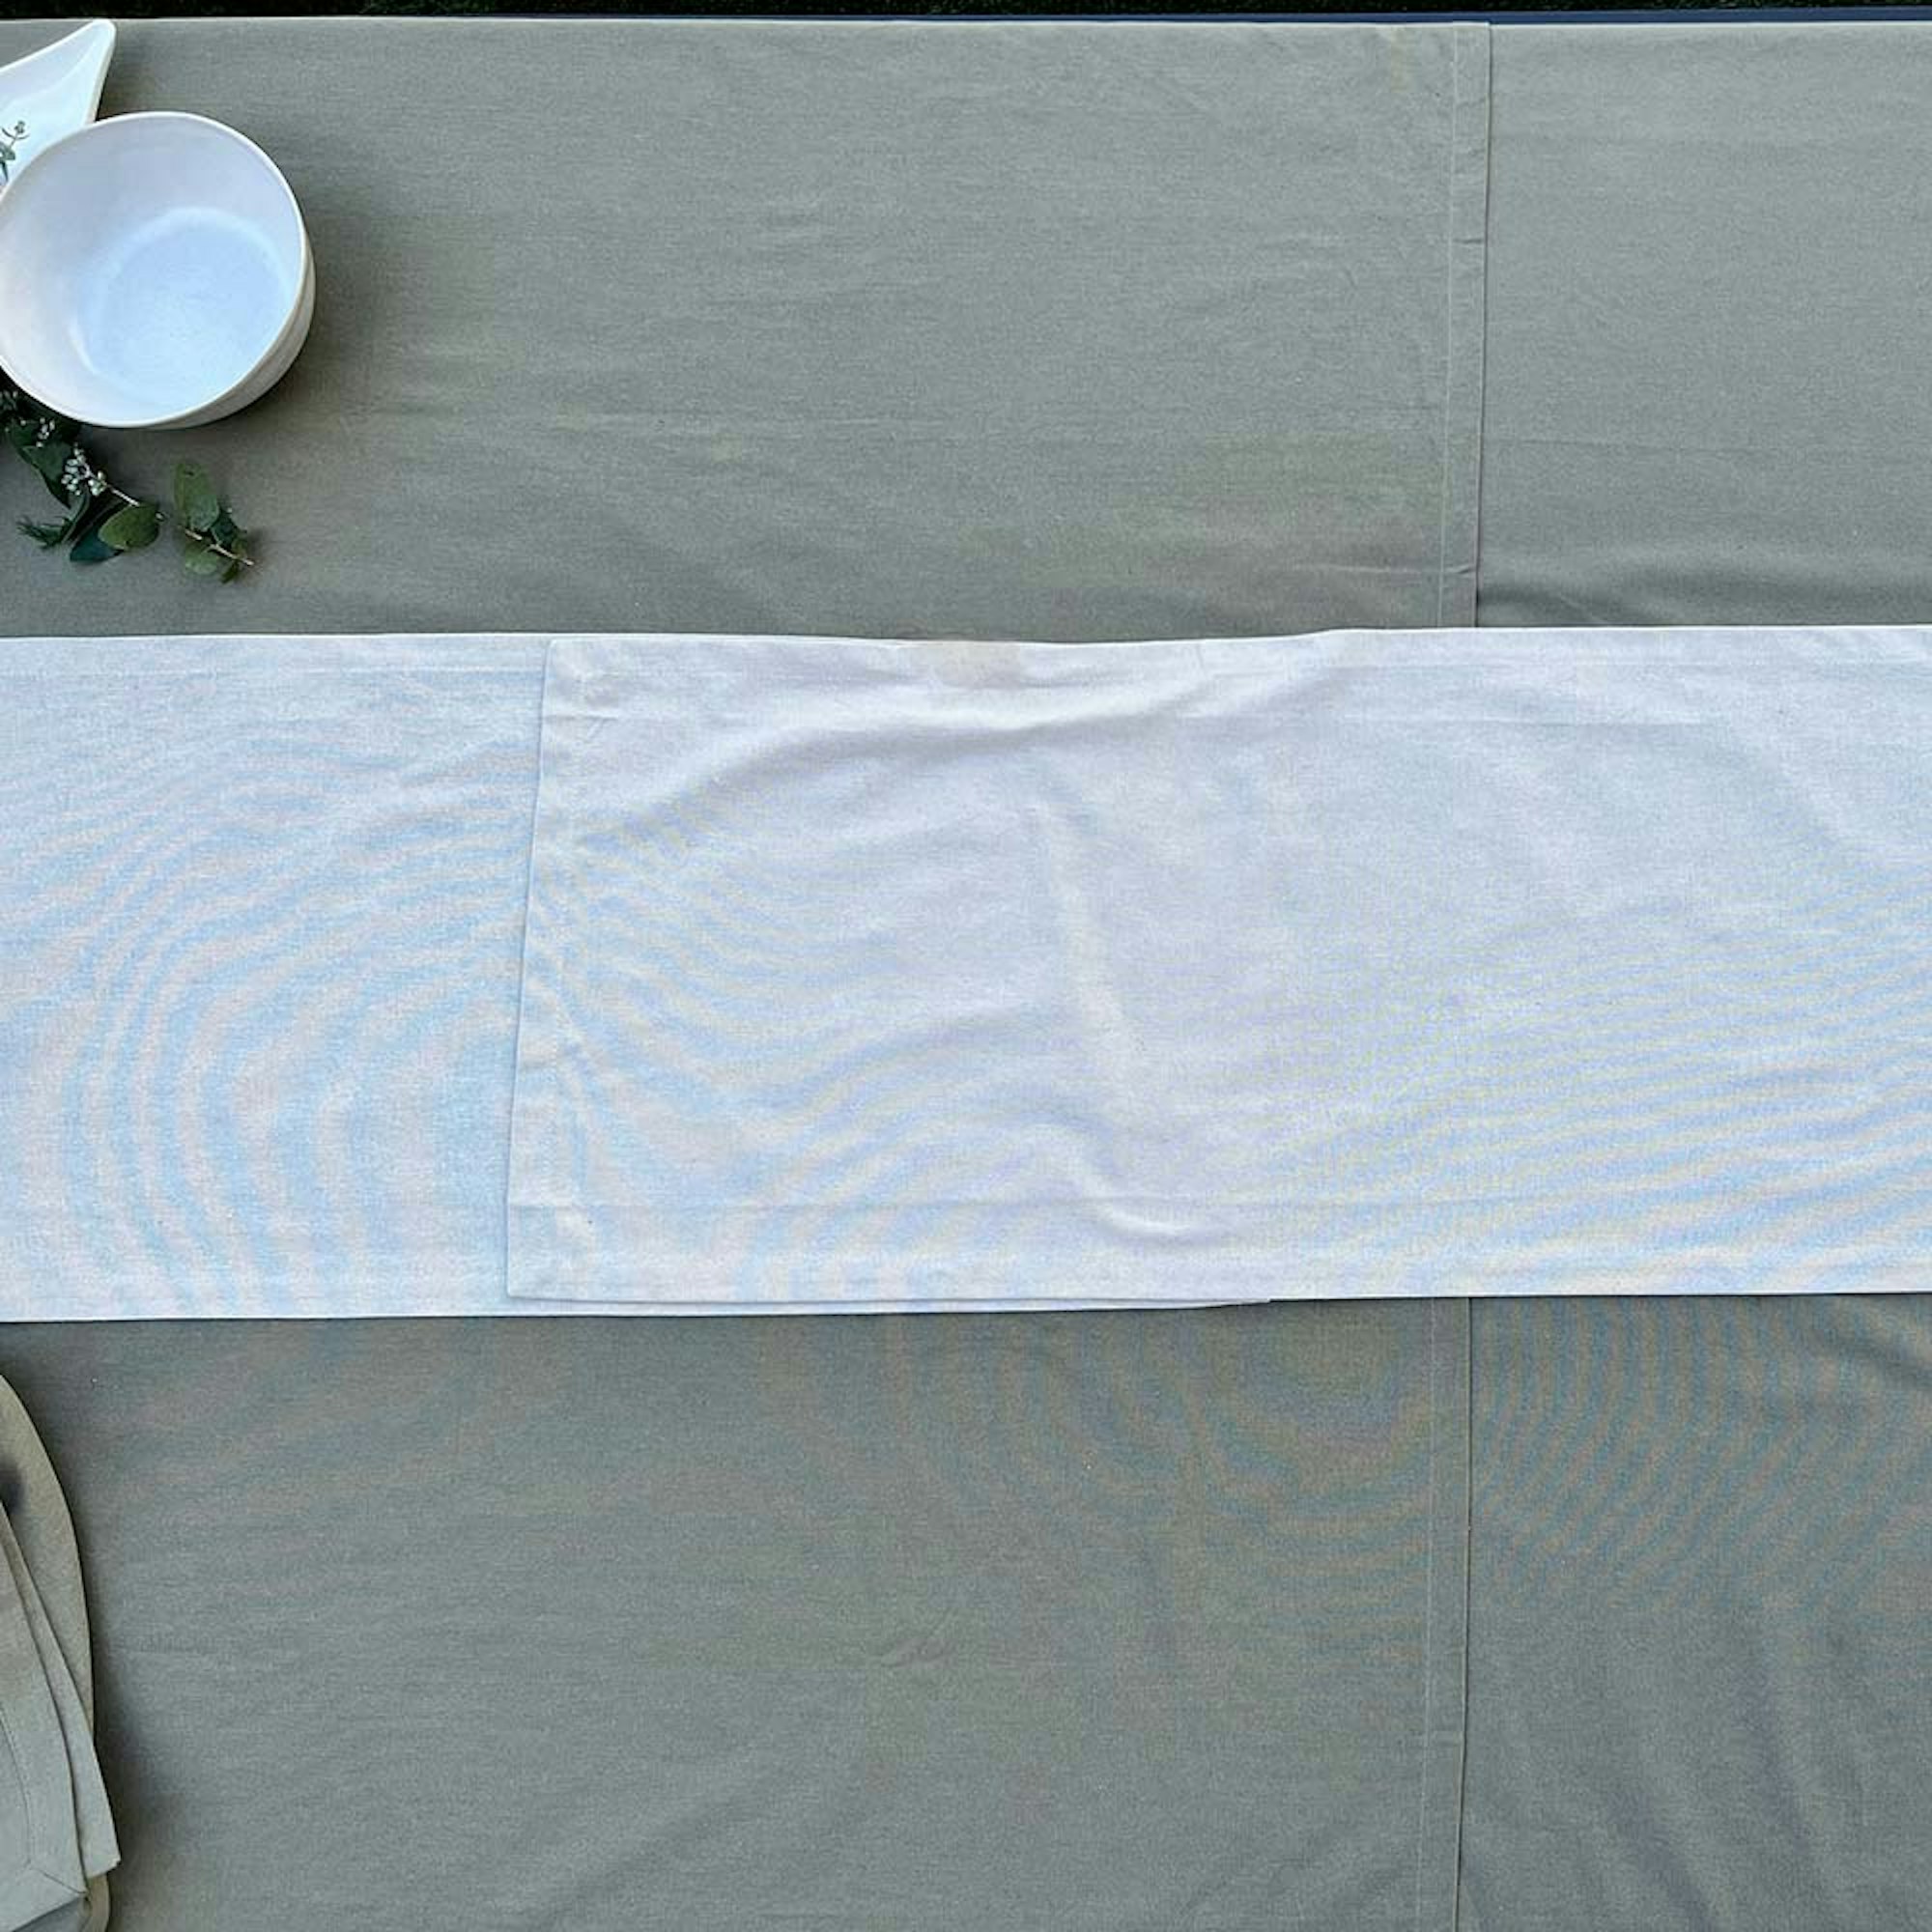 How to style a dining table for a dinner party. Step 2 place your tablecloth and runner. Empty table with table cloth and runner.